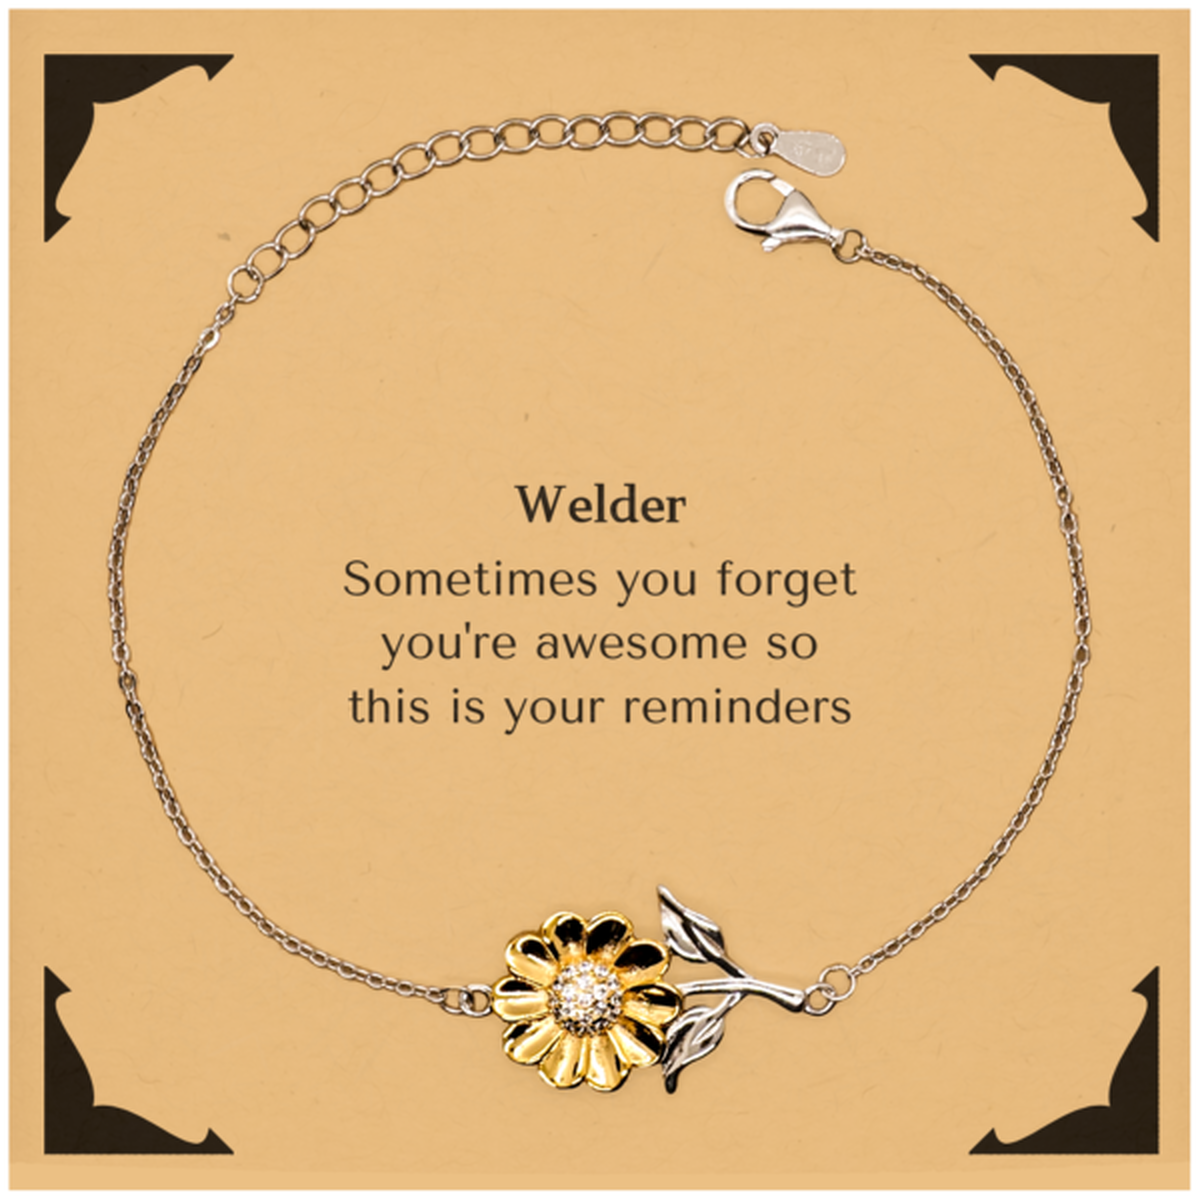 Sentimental Welder Sunflower Bracelet, Welder Sometimes you forget you're awesome so this is your reminders, Graduation Christmas Birthday Gifts for Welder, Men, Women, Coworkers